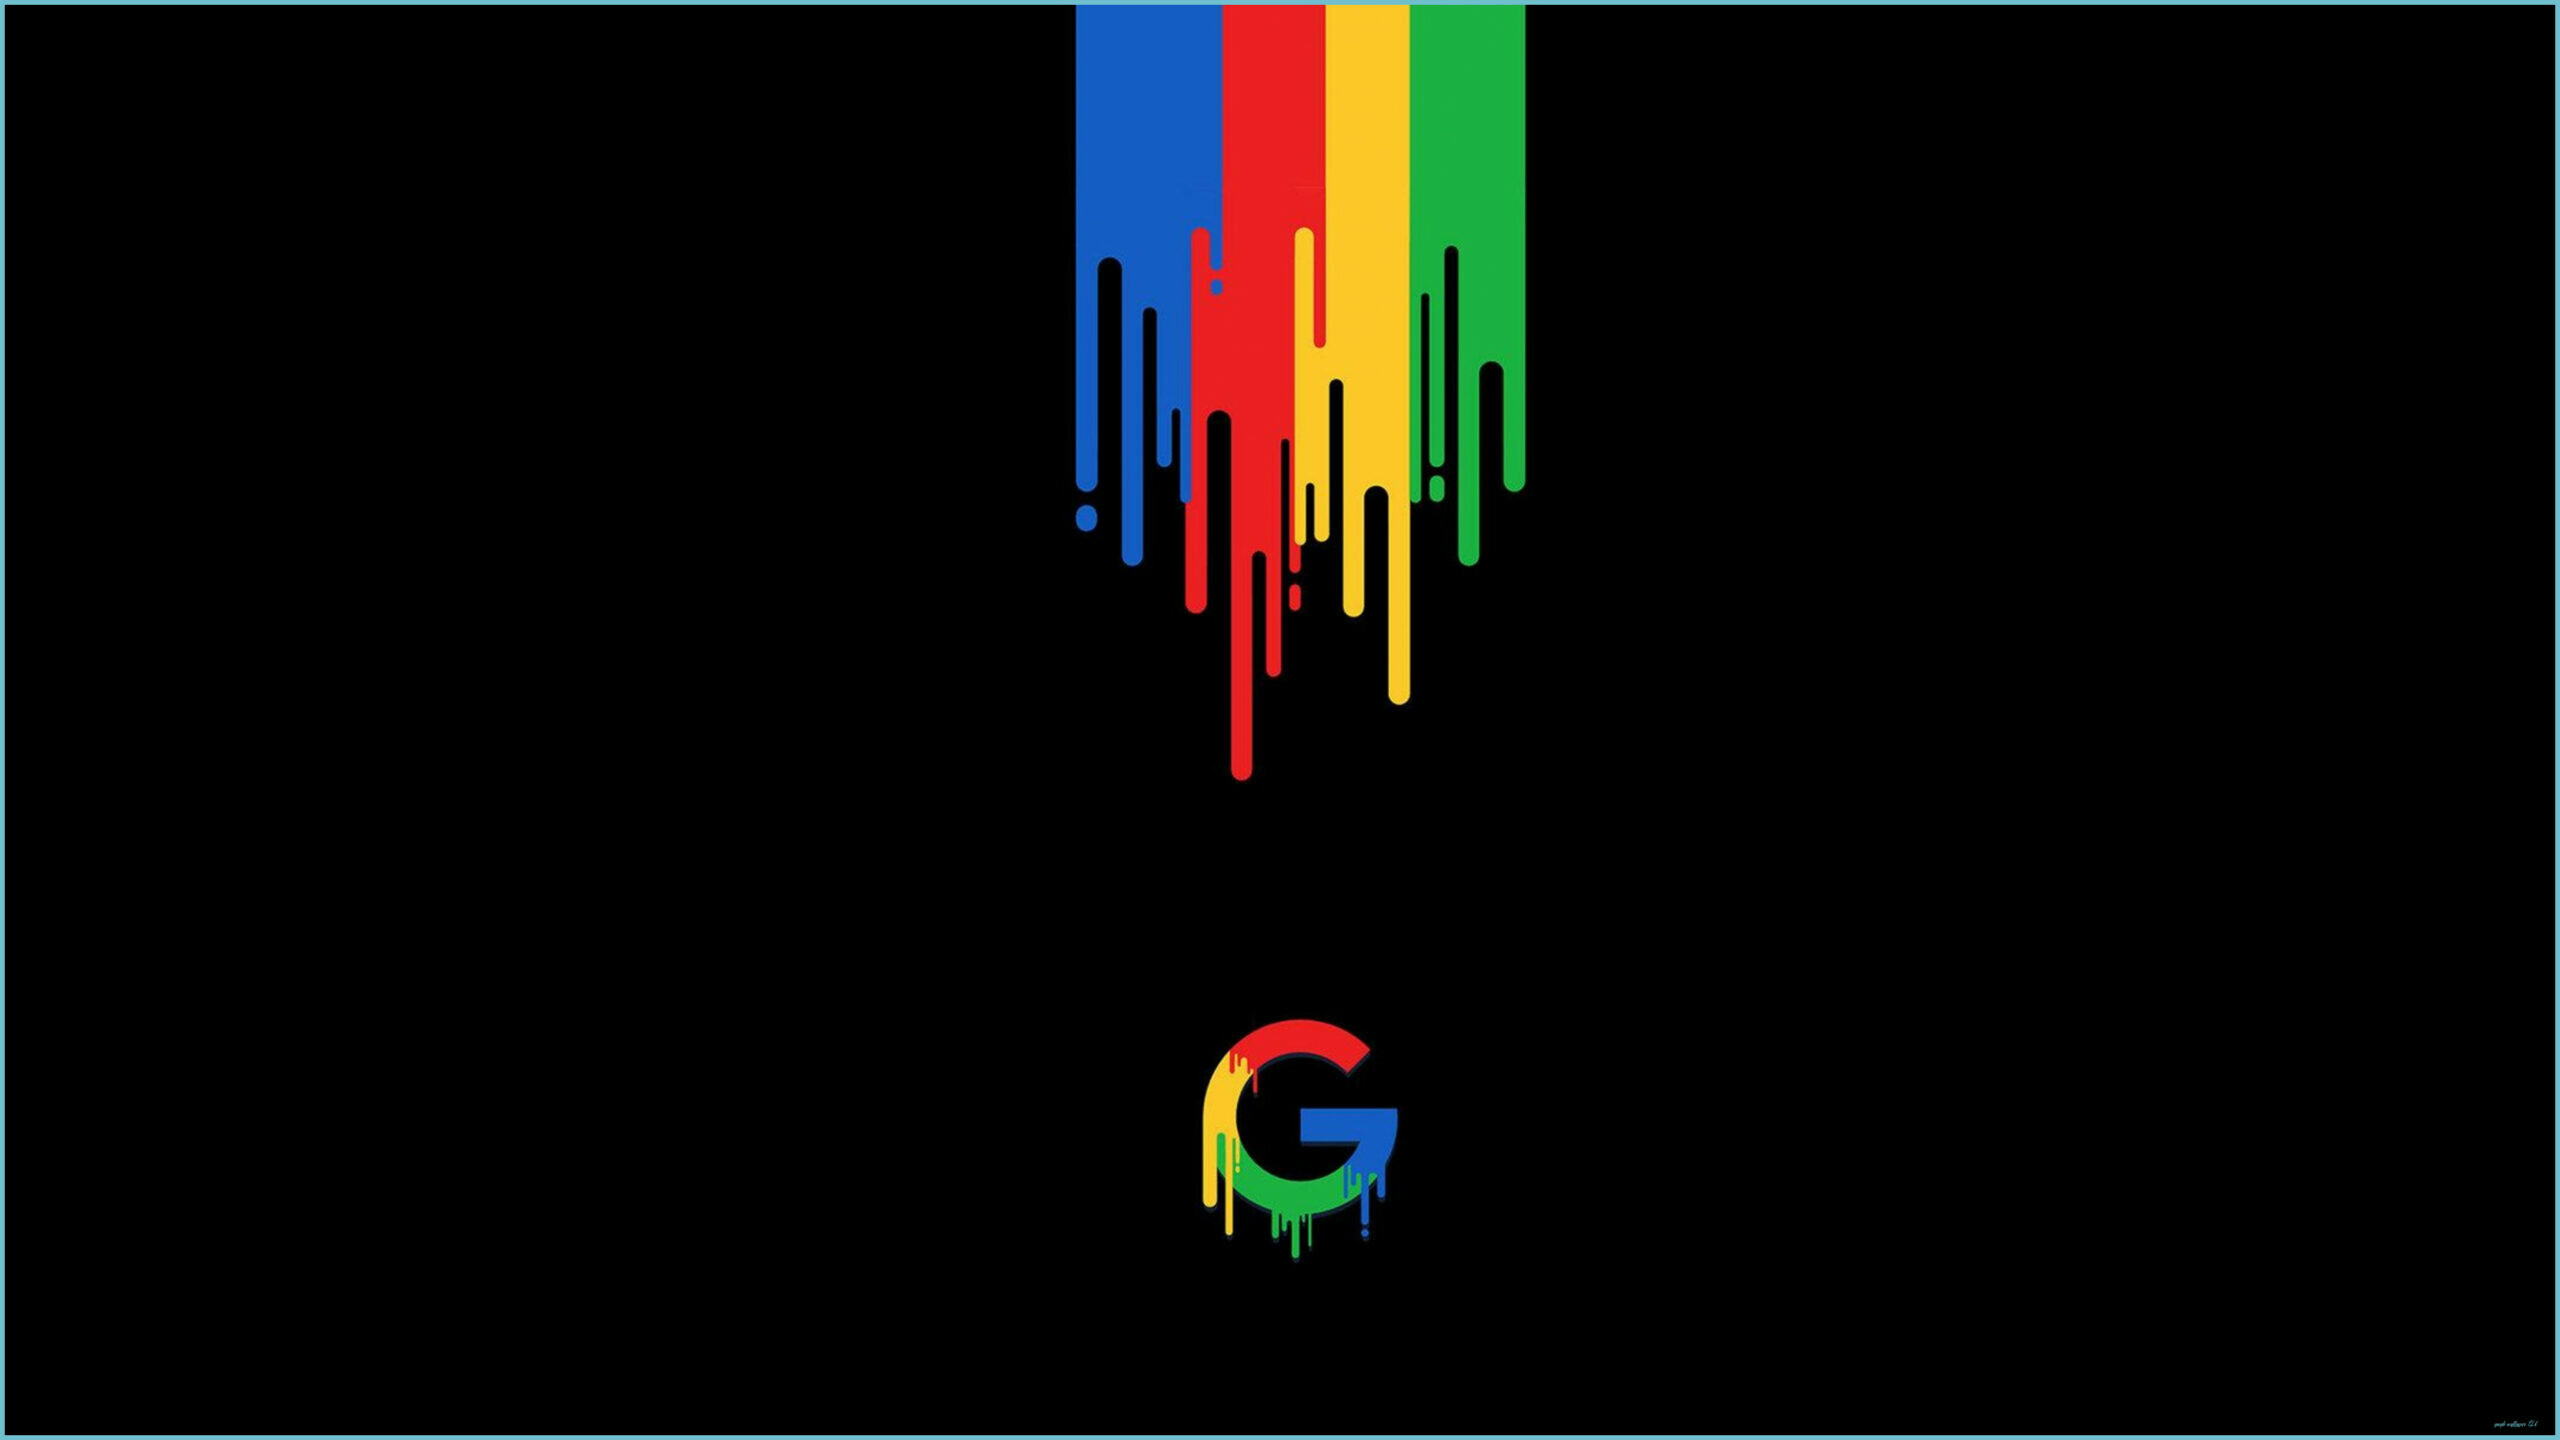 Google: Works in artificial intelligence, machine learning, and natural language processing. 2560x1440 HD Wallpaper.